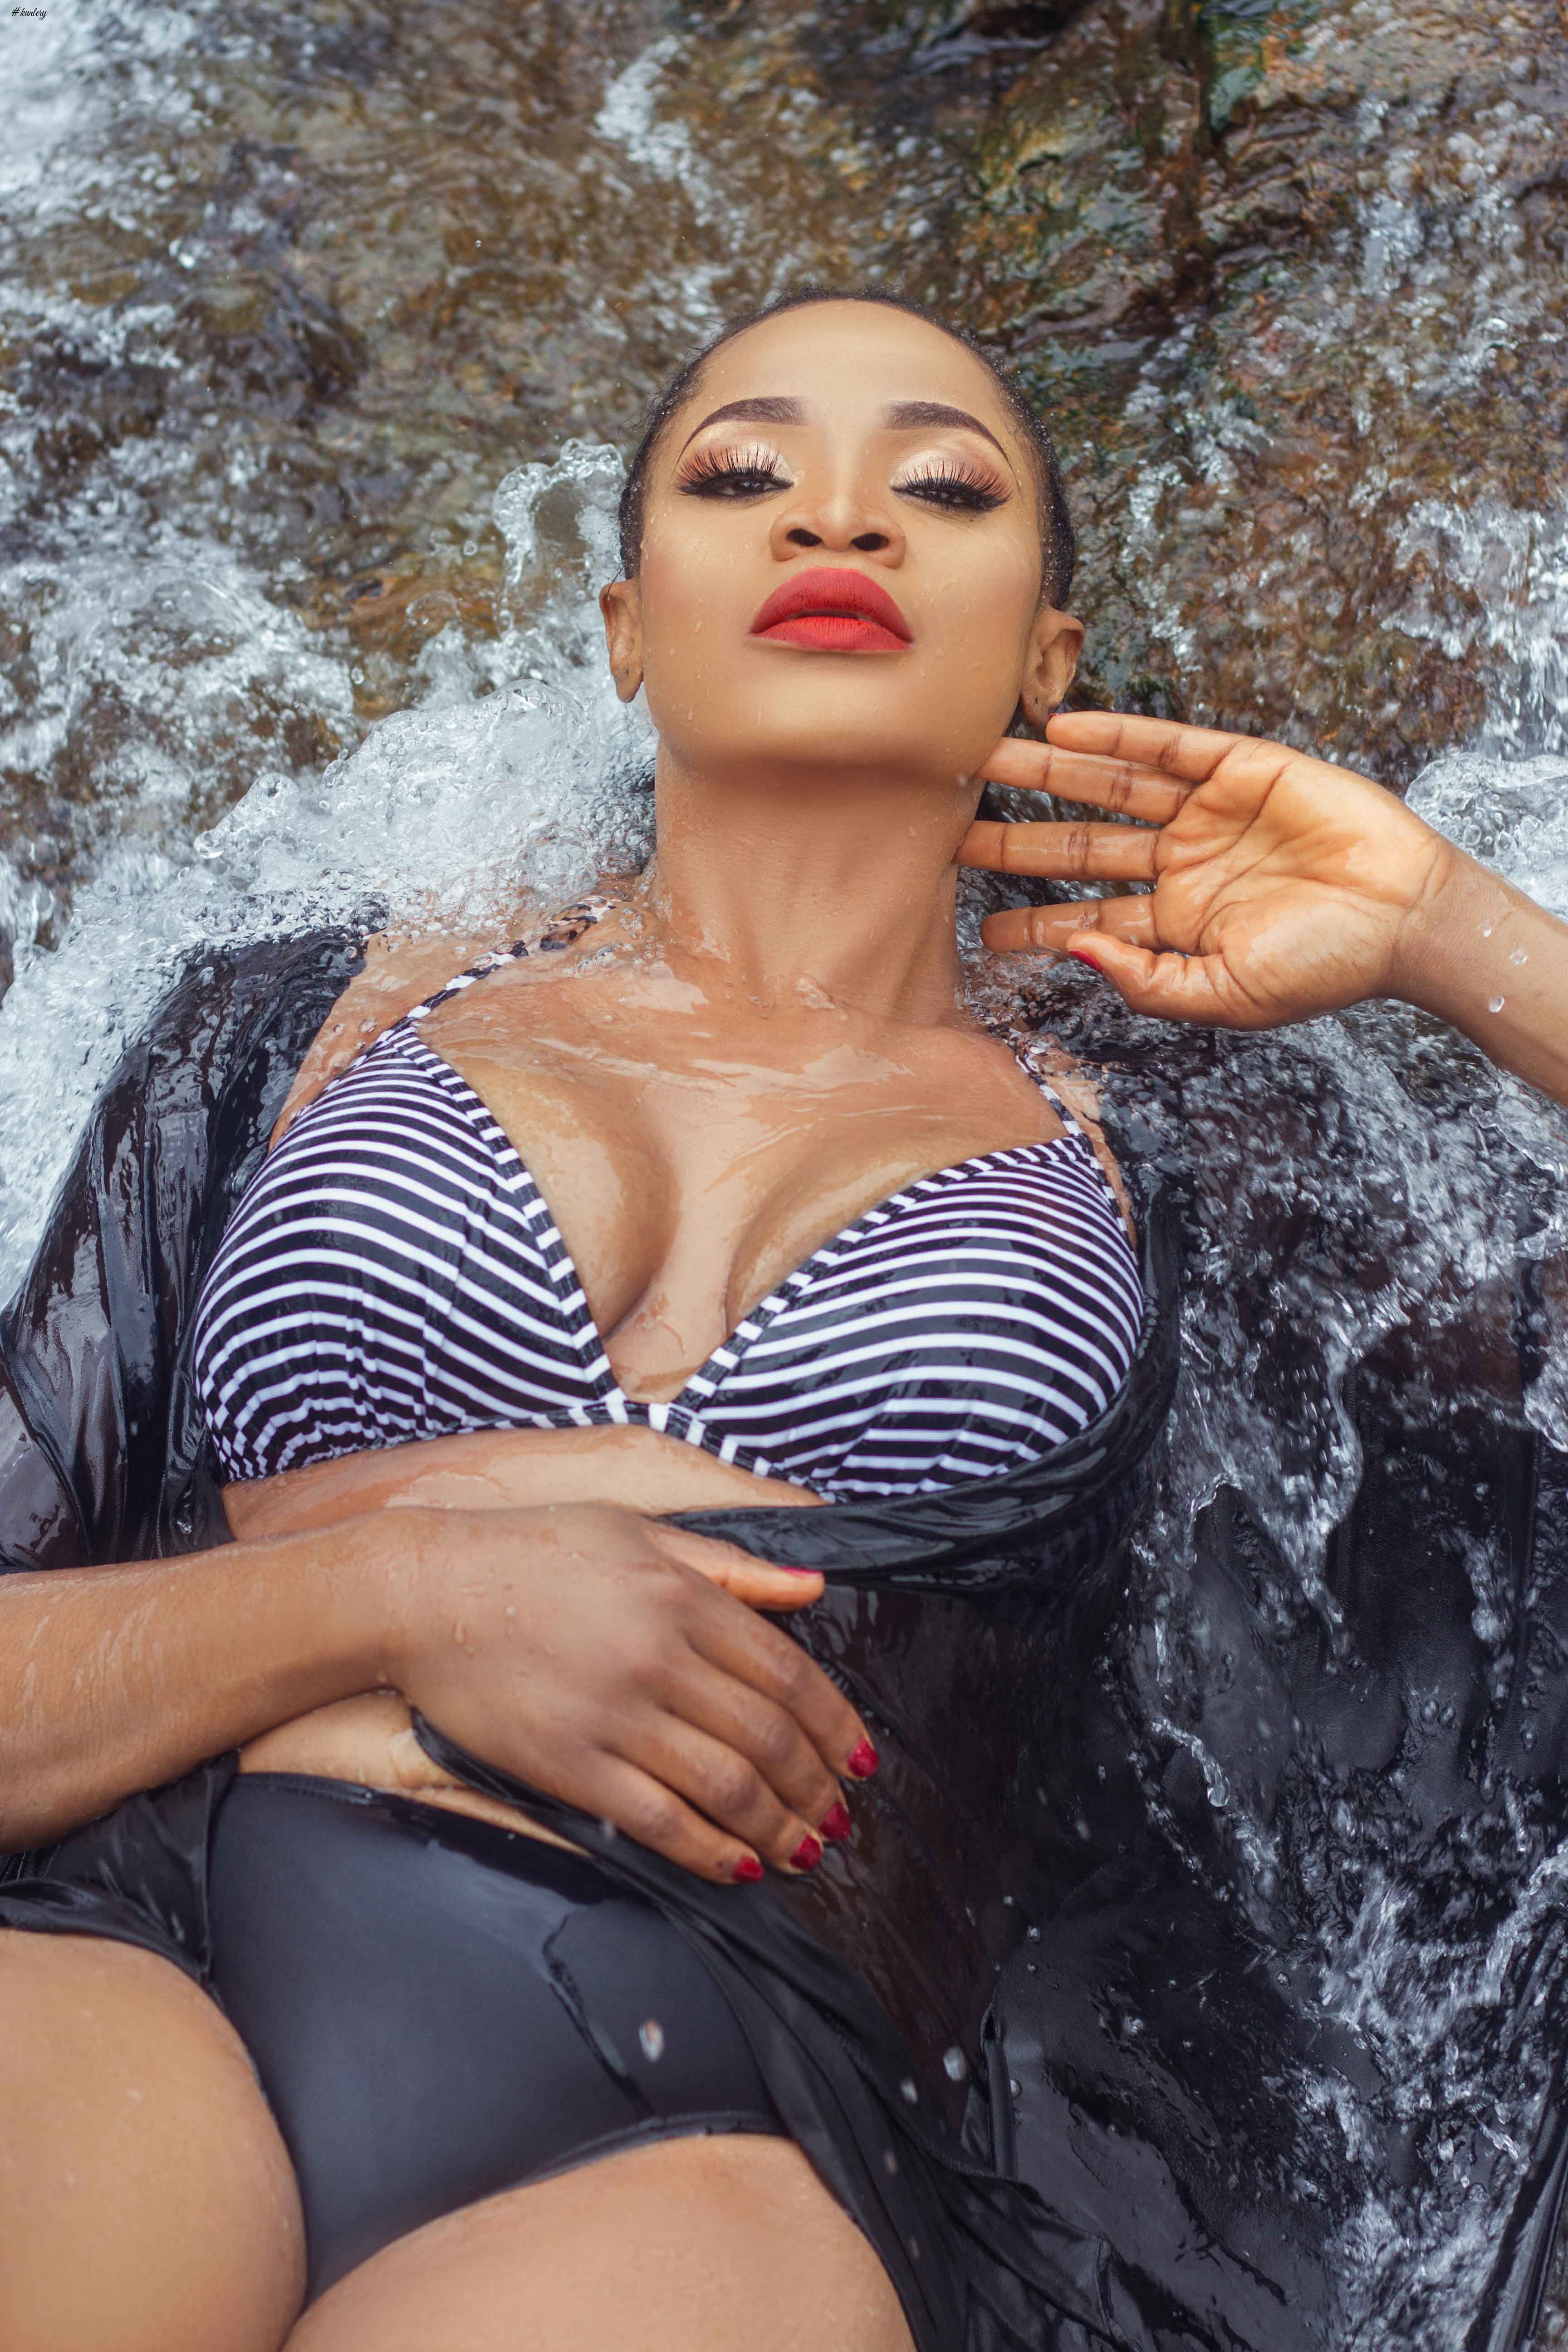 Nollywood Actress Uche Ogbodo Releases Stunning Photos To Celebrate Her Birthday!